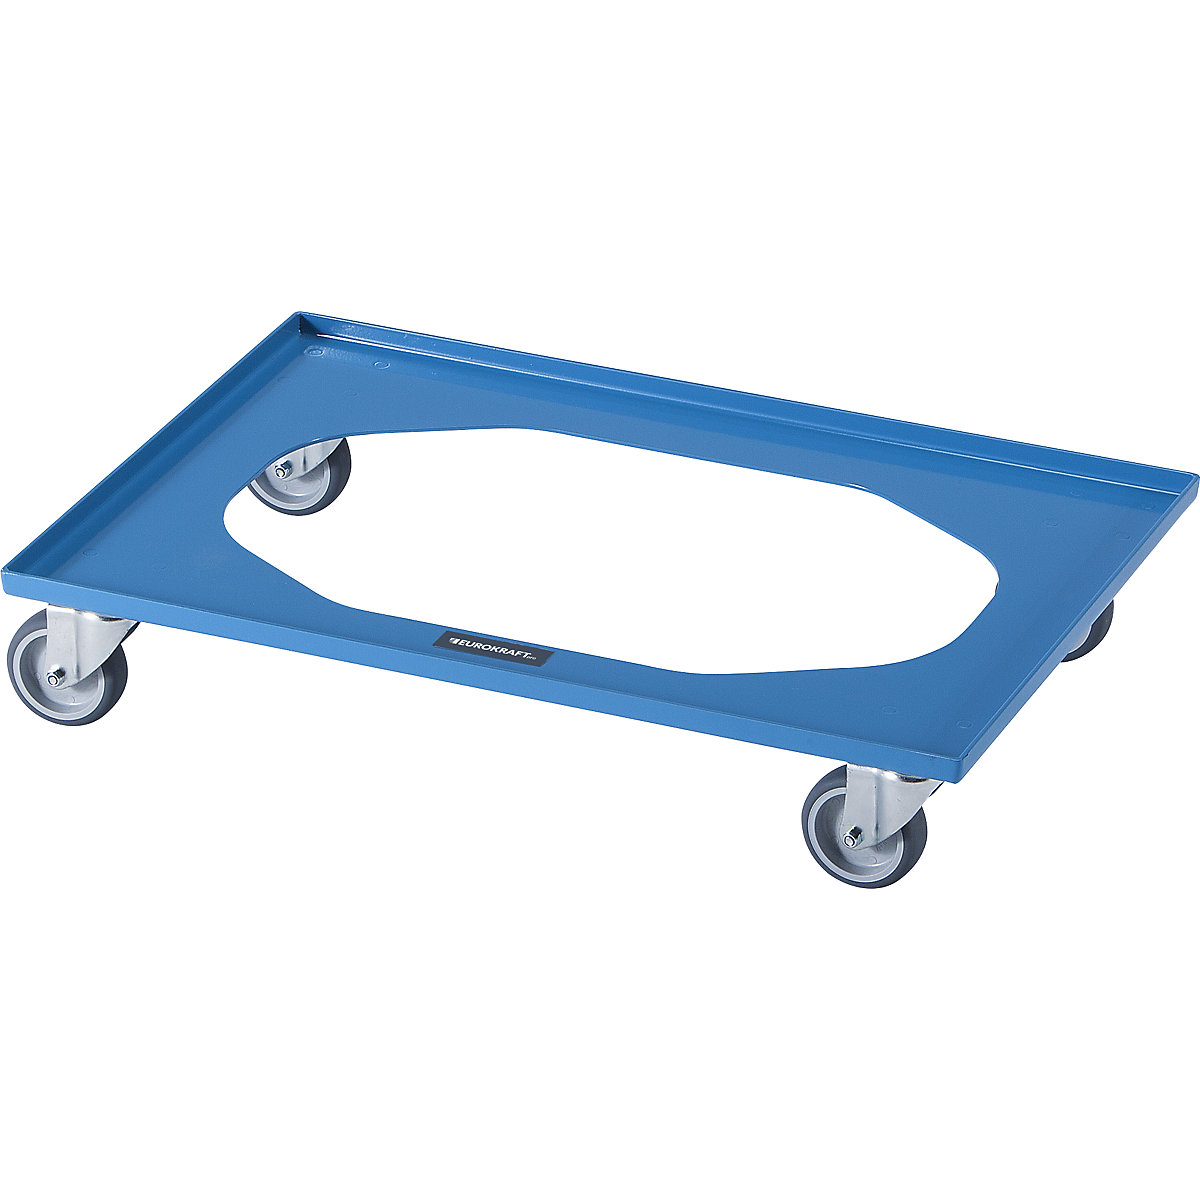 NEO transport dolly – eurokraft pro, for Euro formats 800 x 600 mm, max. load 250 kg, 5+ items-7